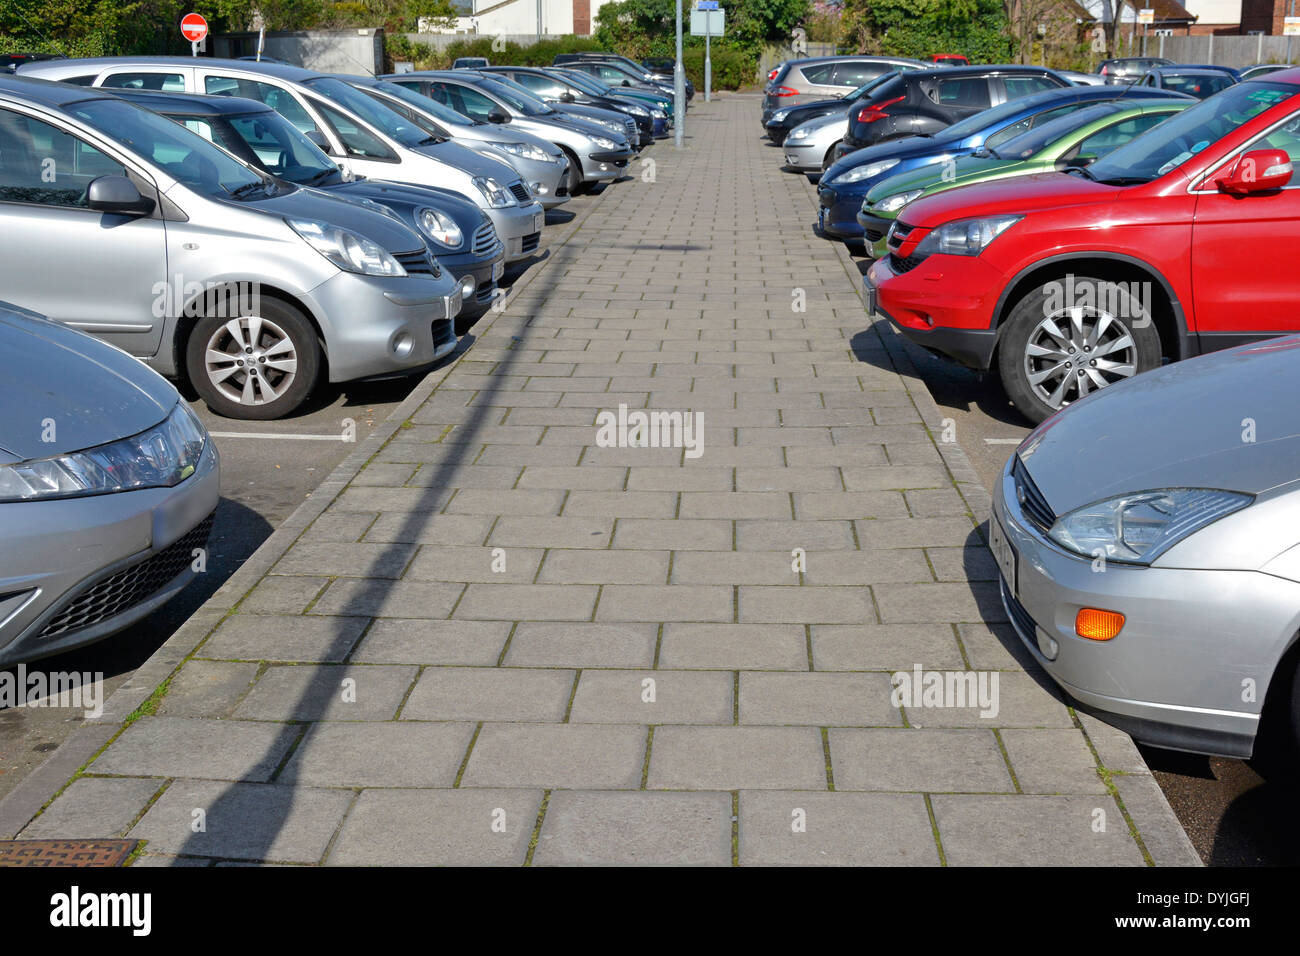 Basildon Council operated pay & display shoppers car park behind Billericay Essex shopping High Street cars in parking bays beside path England UK Stock Photo